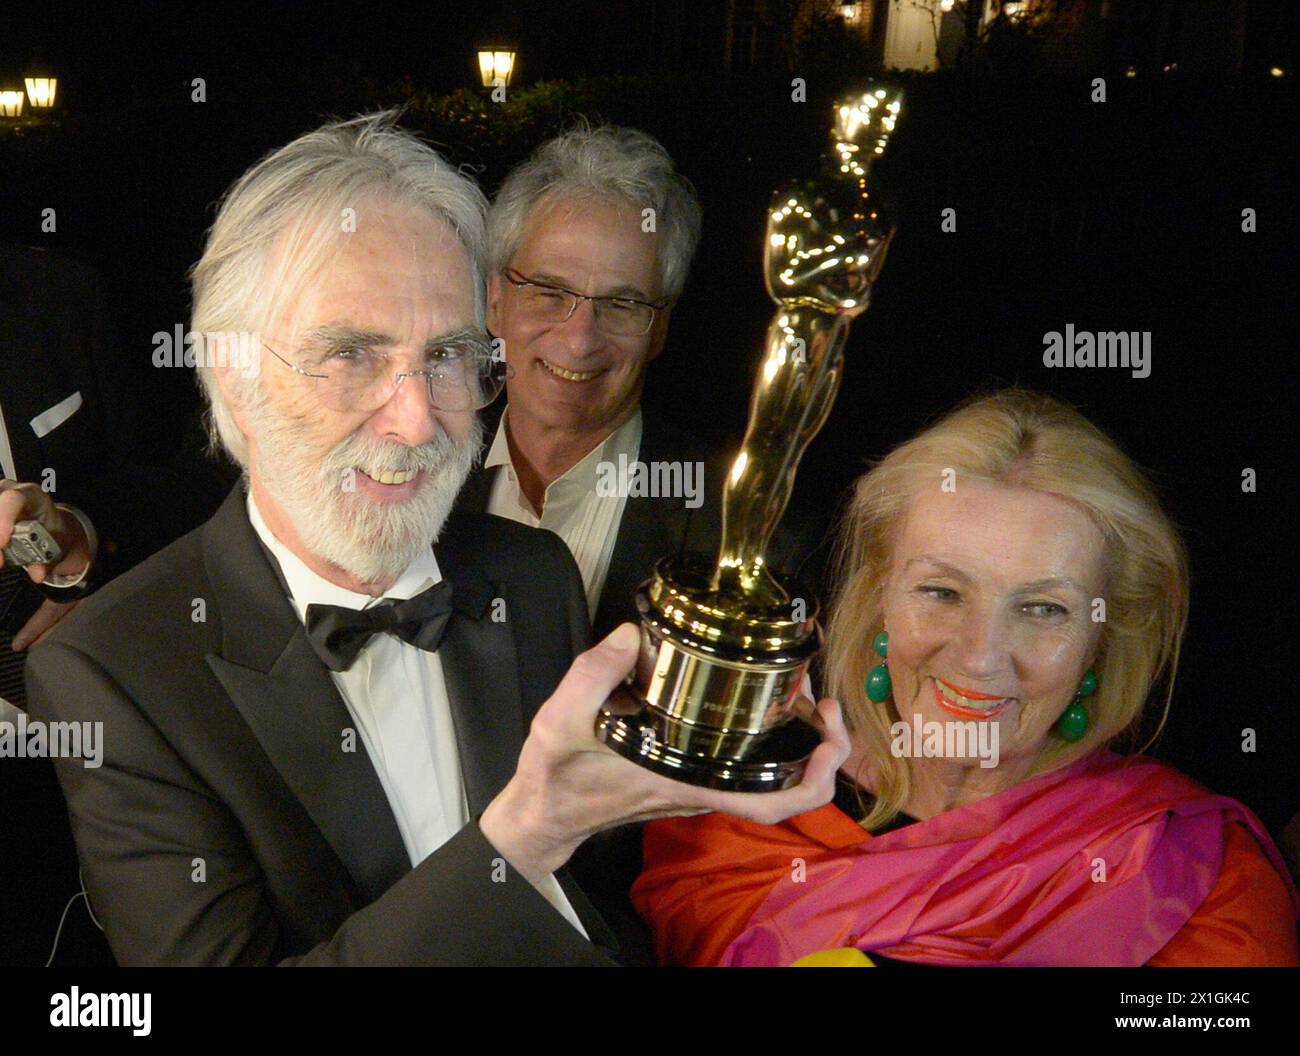 Austrian director Michael Haneke received an Oscar for Best Foreign Language Film of the Year for 'Amour' during the 85th Academy Awards at the Dolby Theatre in Hollywood, California, USA, 24 February 2013.    PICTURE: Michael Haneke and his wife Susanne. - 20130225 PD0300 - Rechteinfo: Rights Managed (RM) Stock Photo